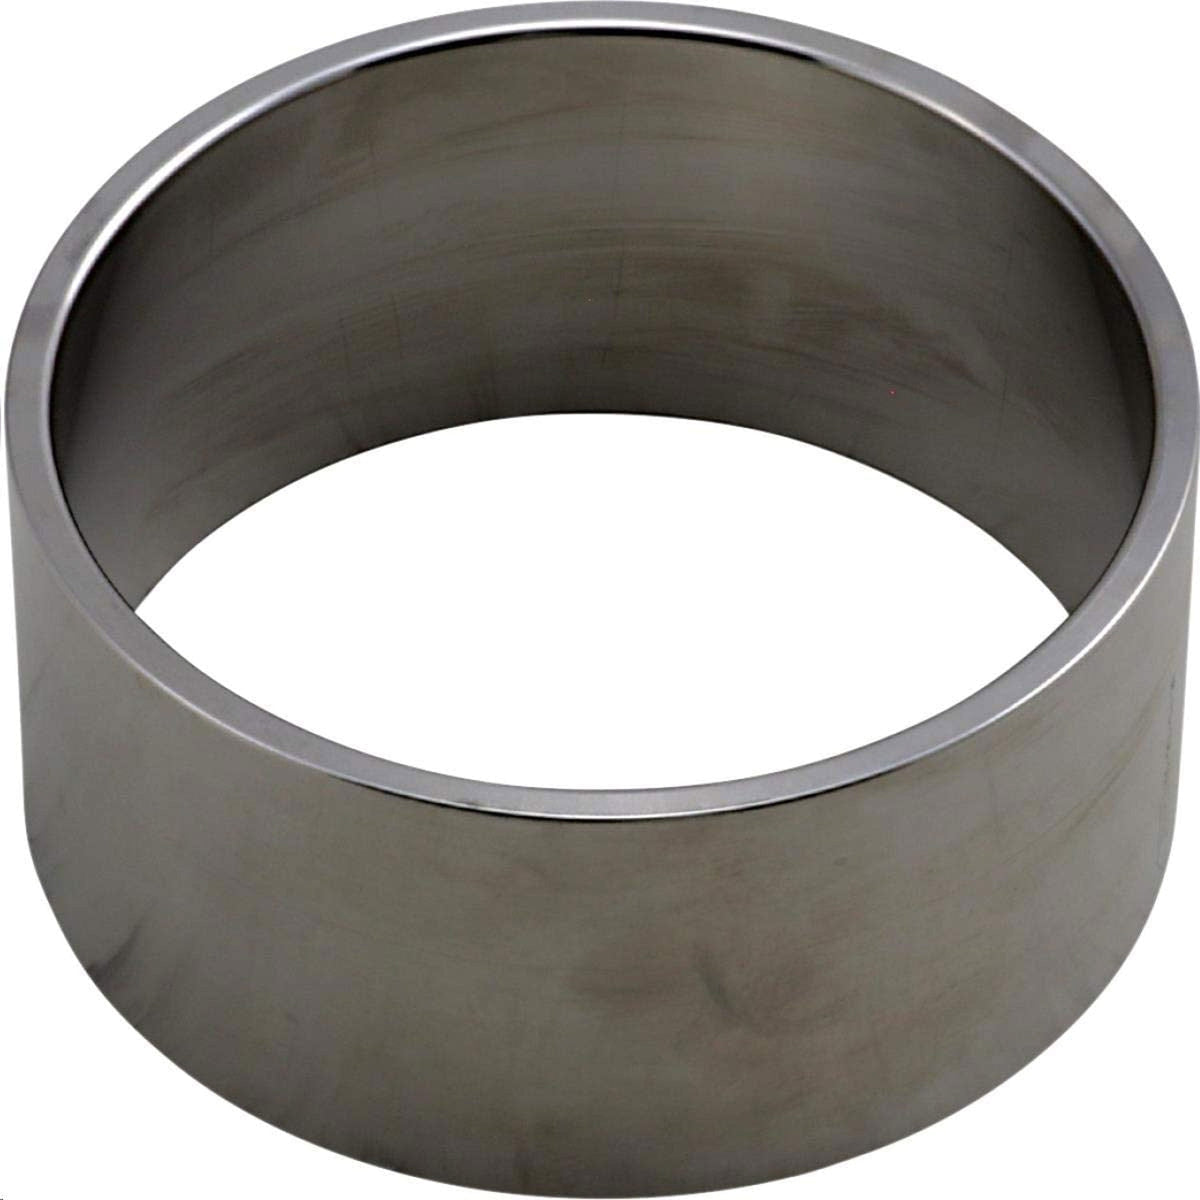 Solas Qualifies for Free Shipping Solas SR-HS-156-001 S/D Wear Ring #SR-HS-156-001